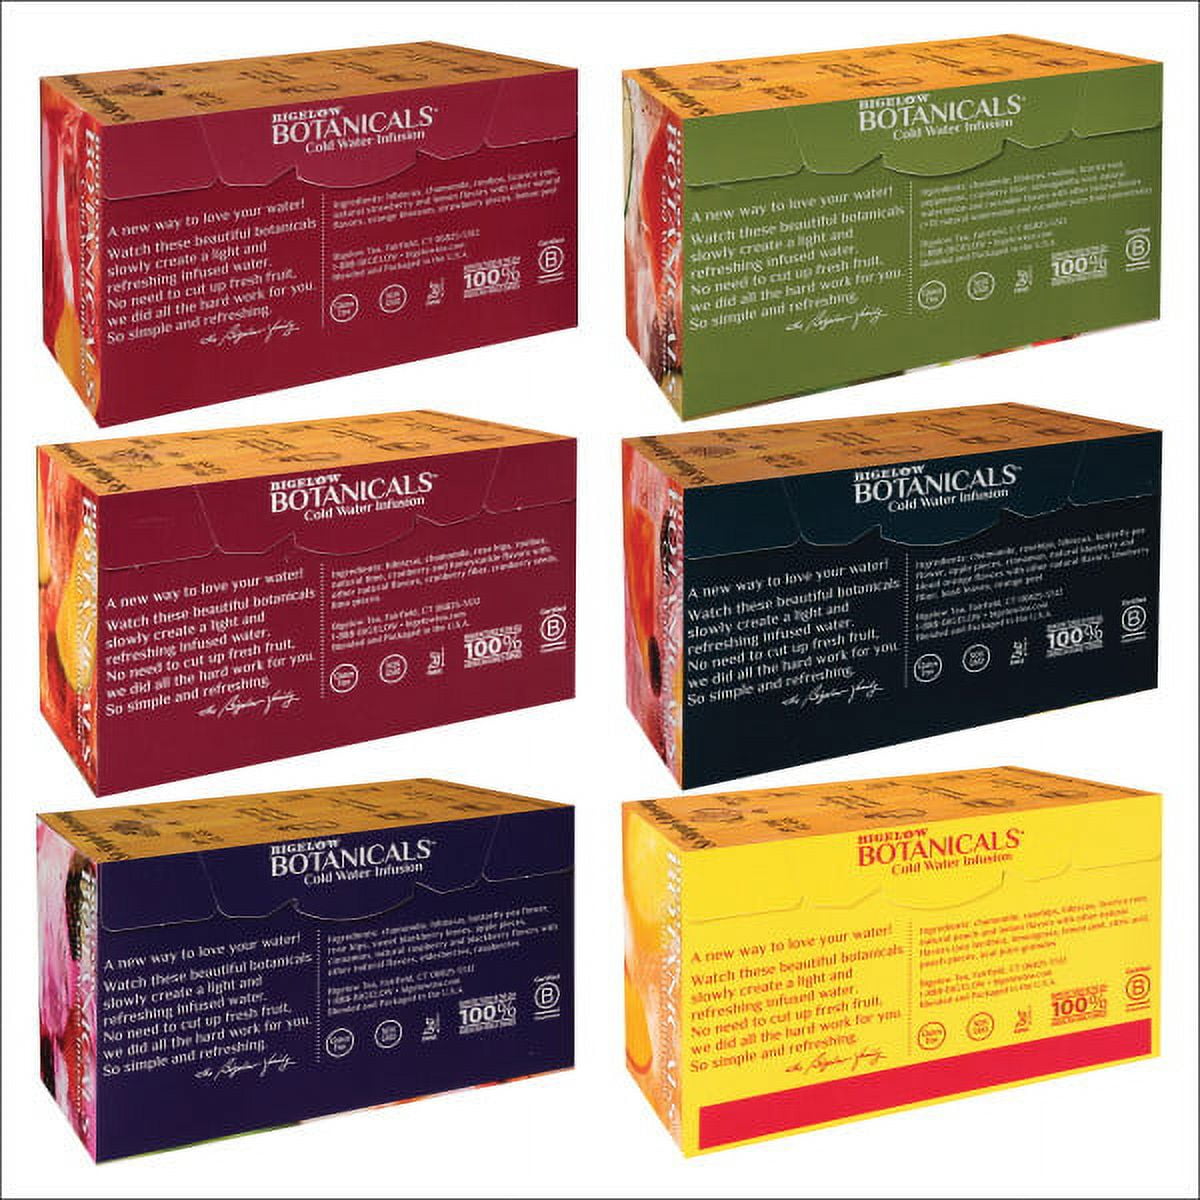 Mixed Case of Bigelow Botanicals - Case of 6 Boxes - Total of 108